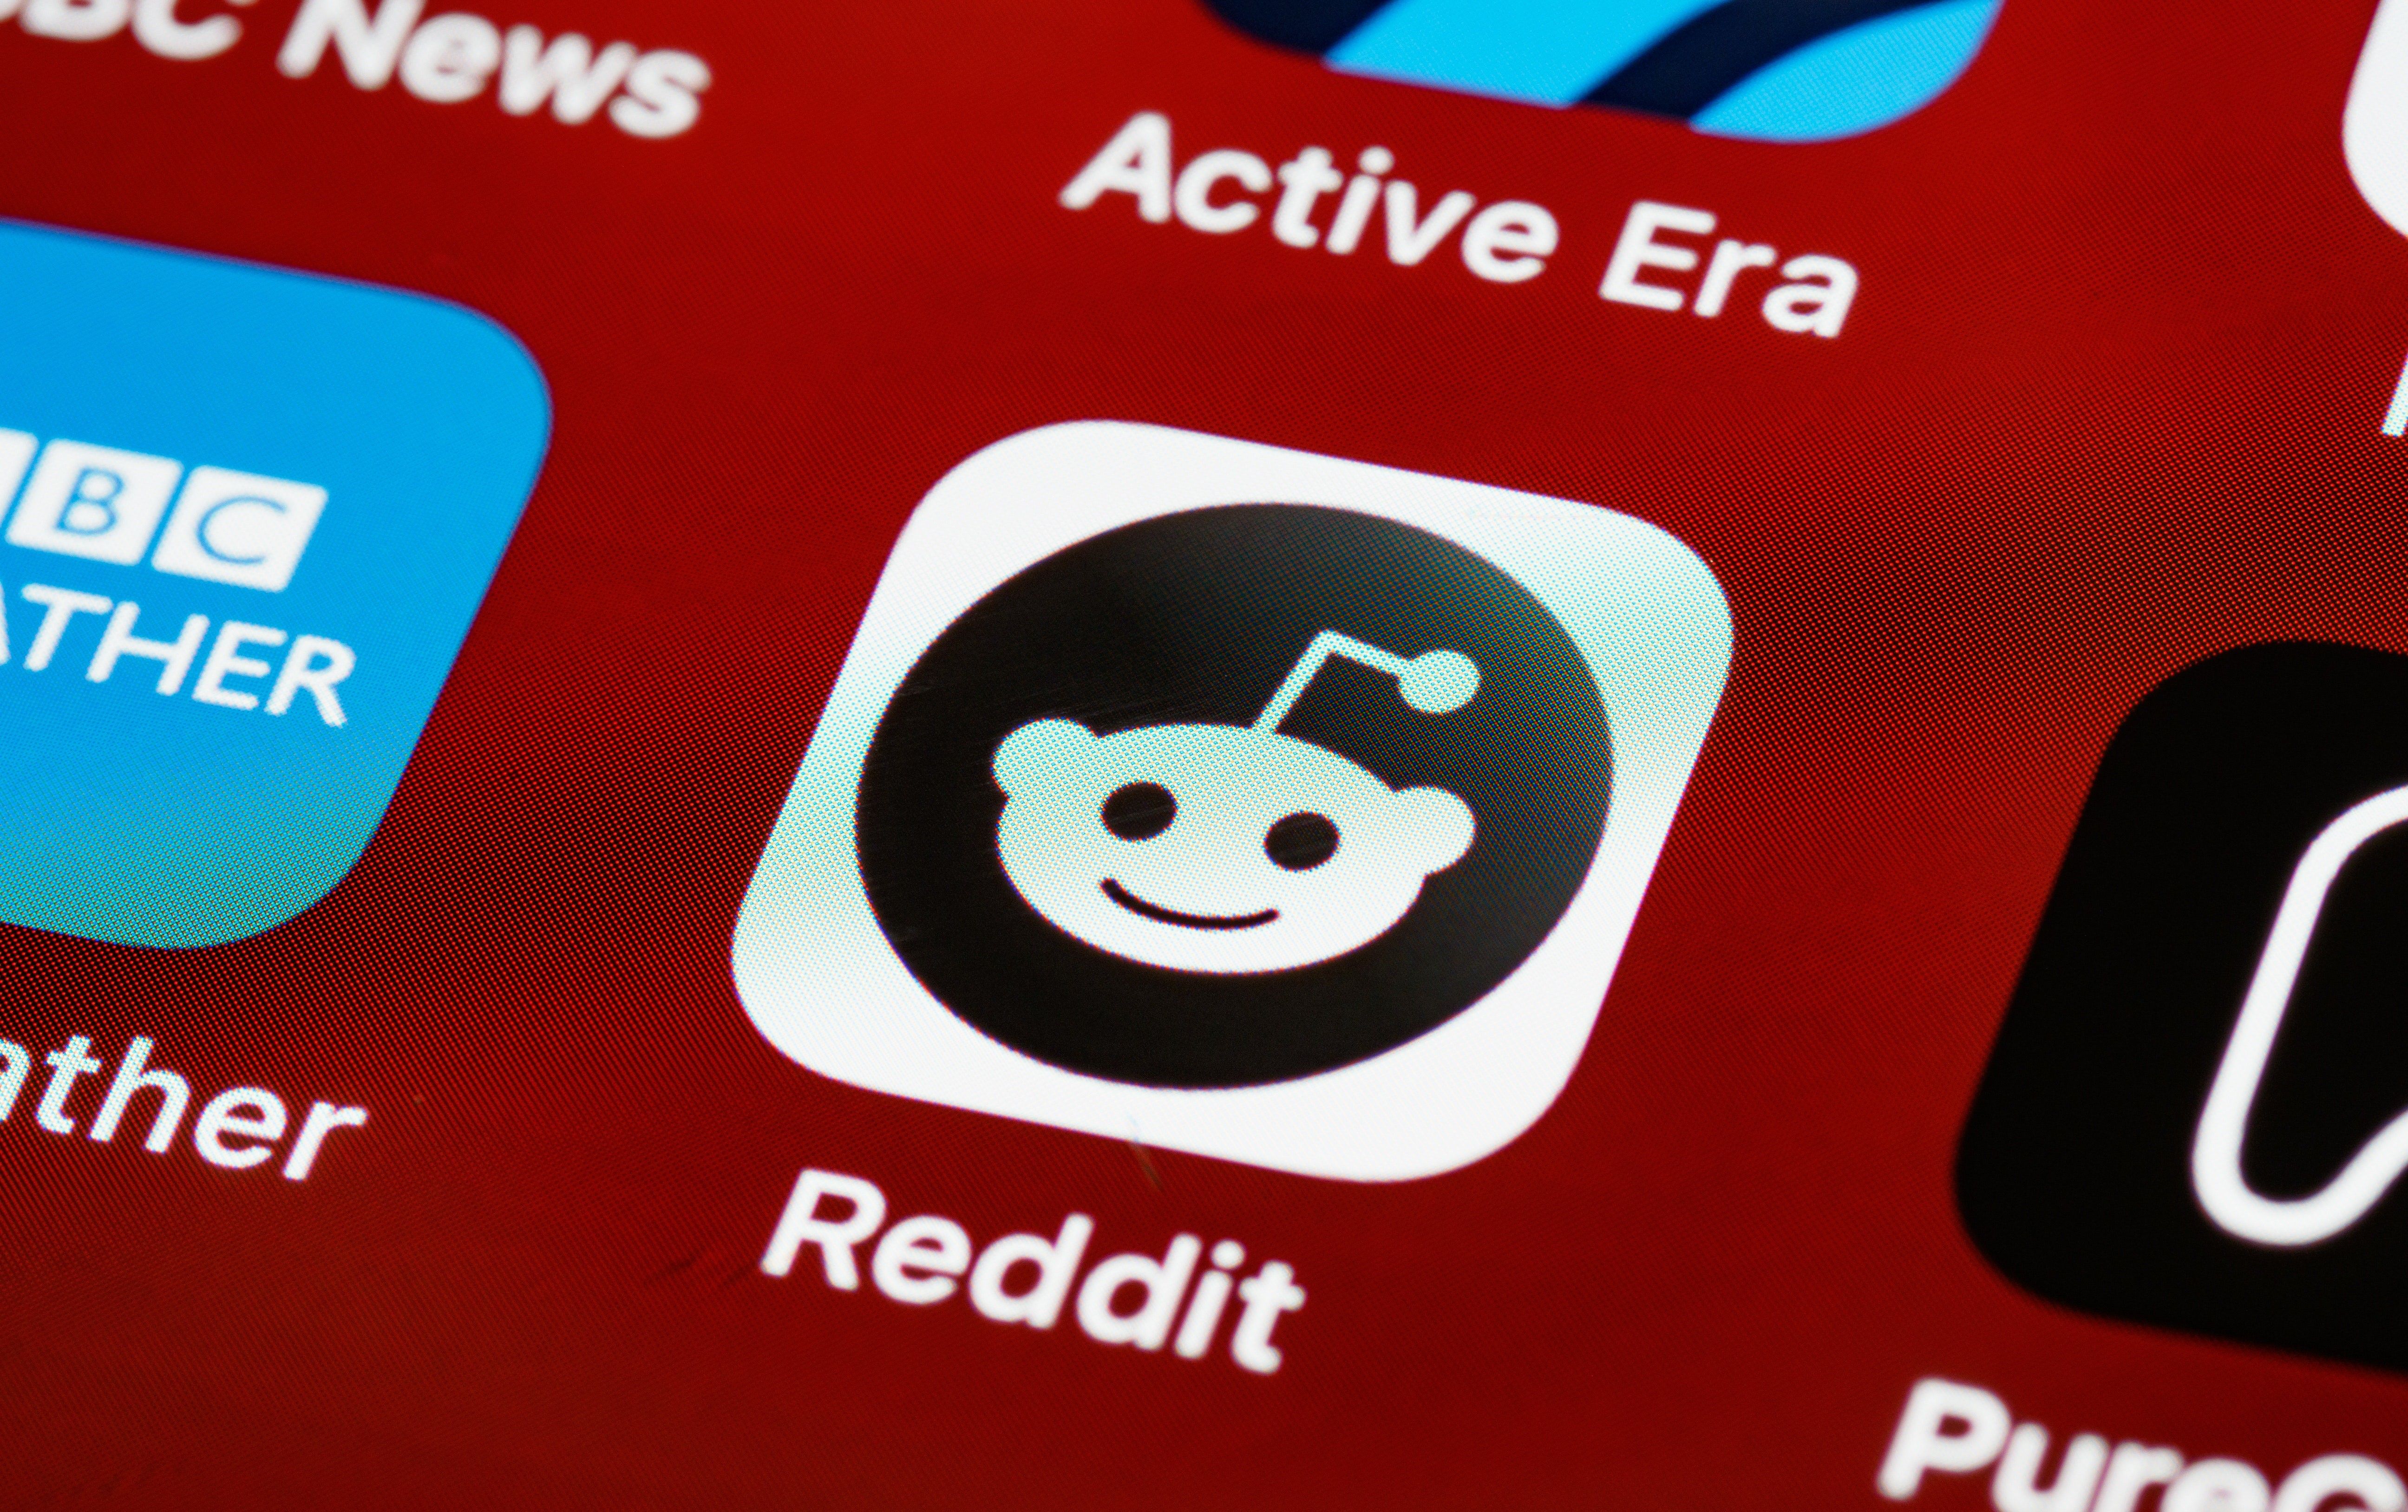 Use Reddit to connect with like-minded people